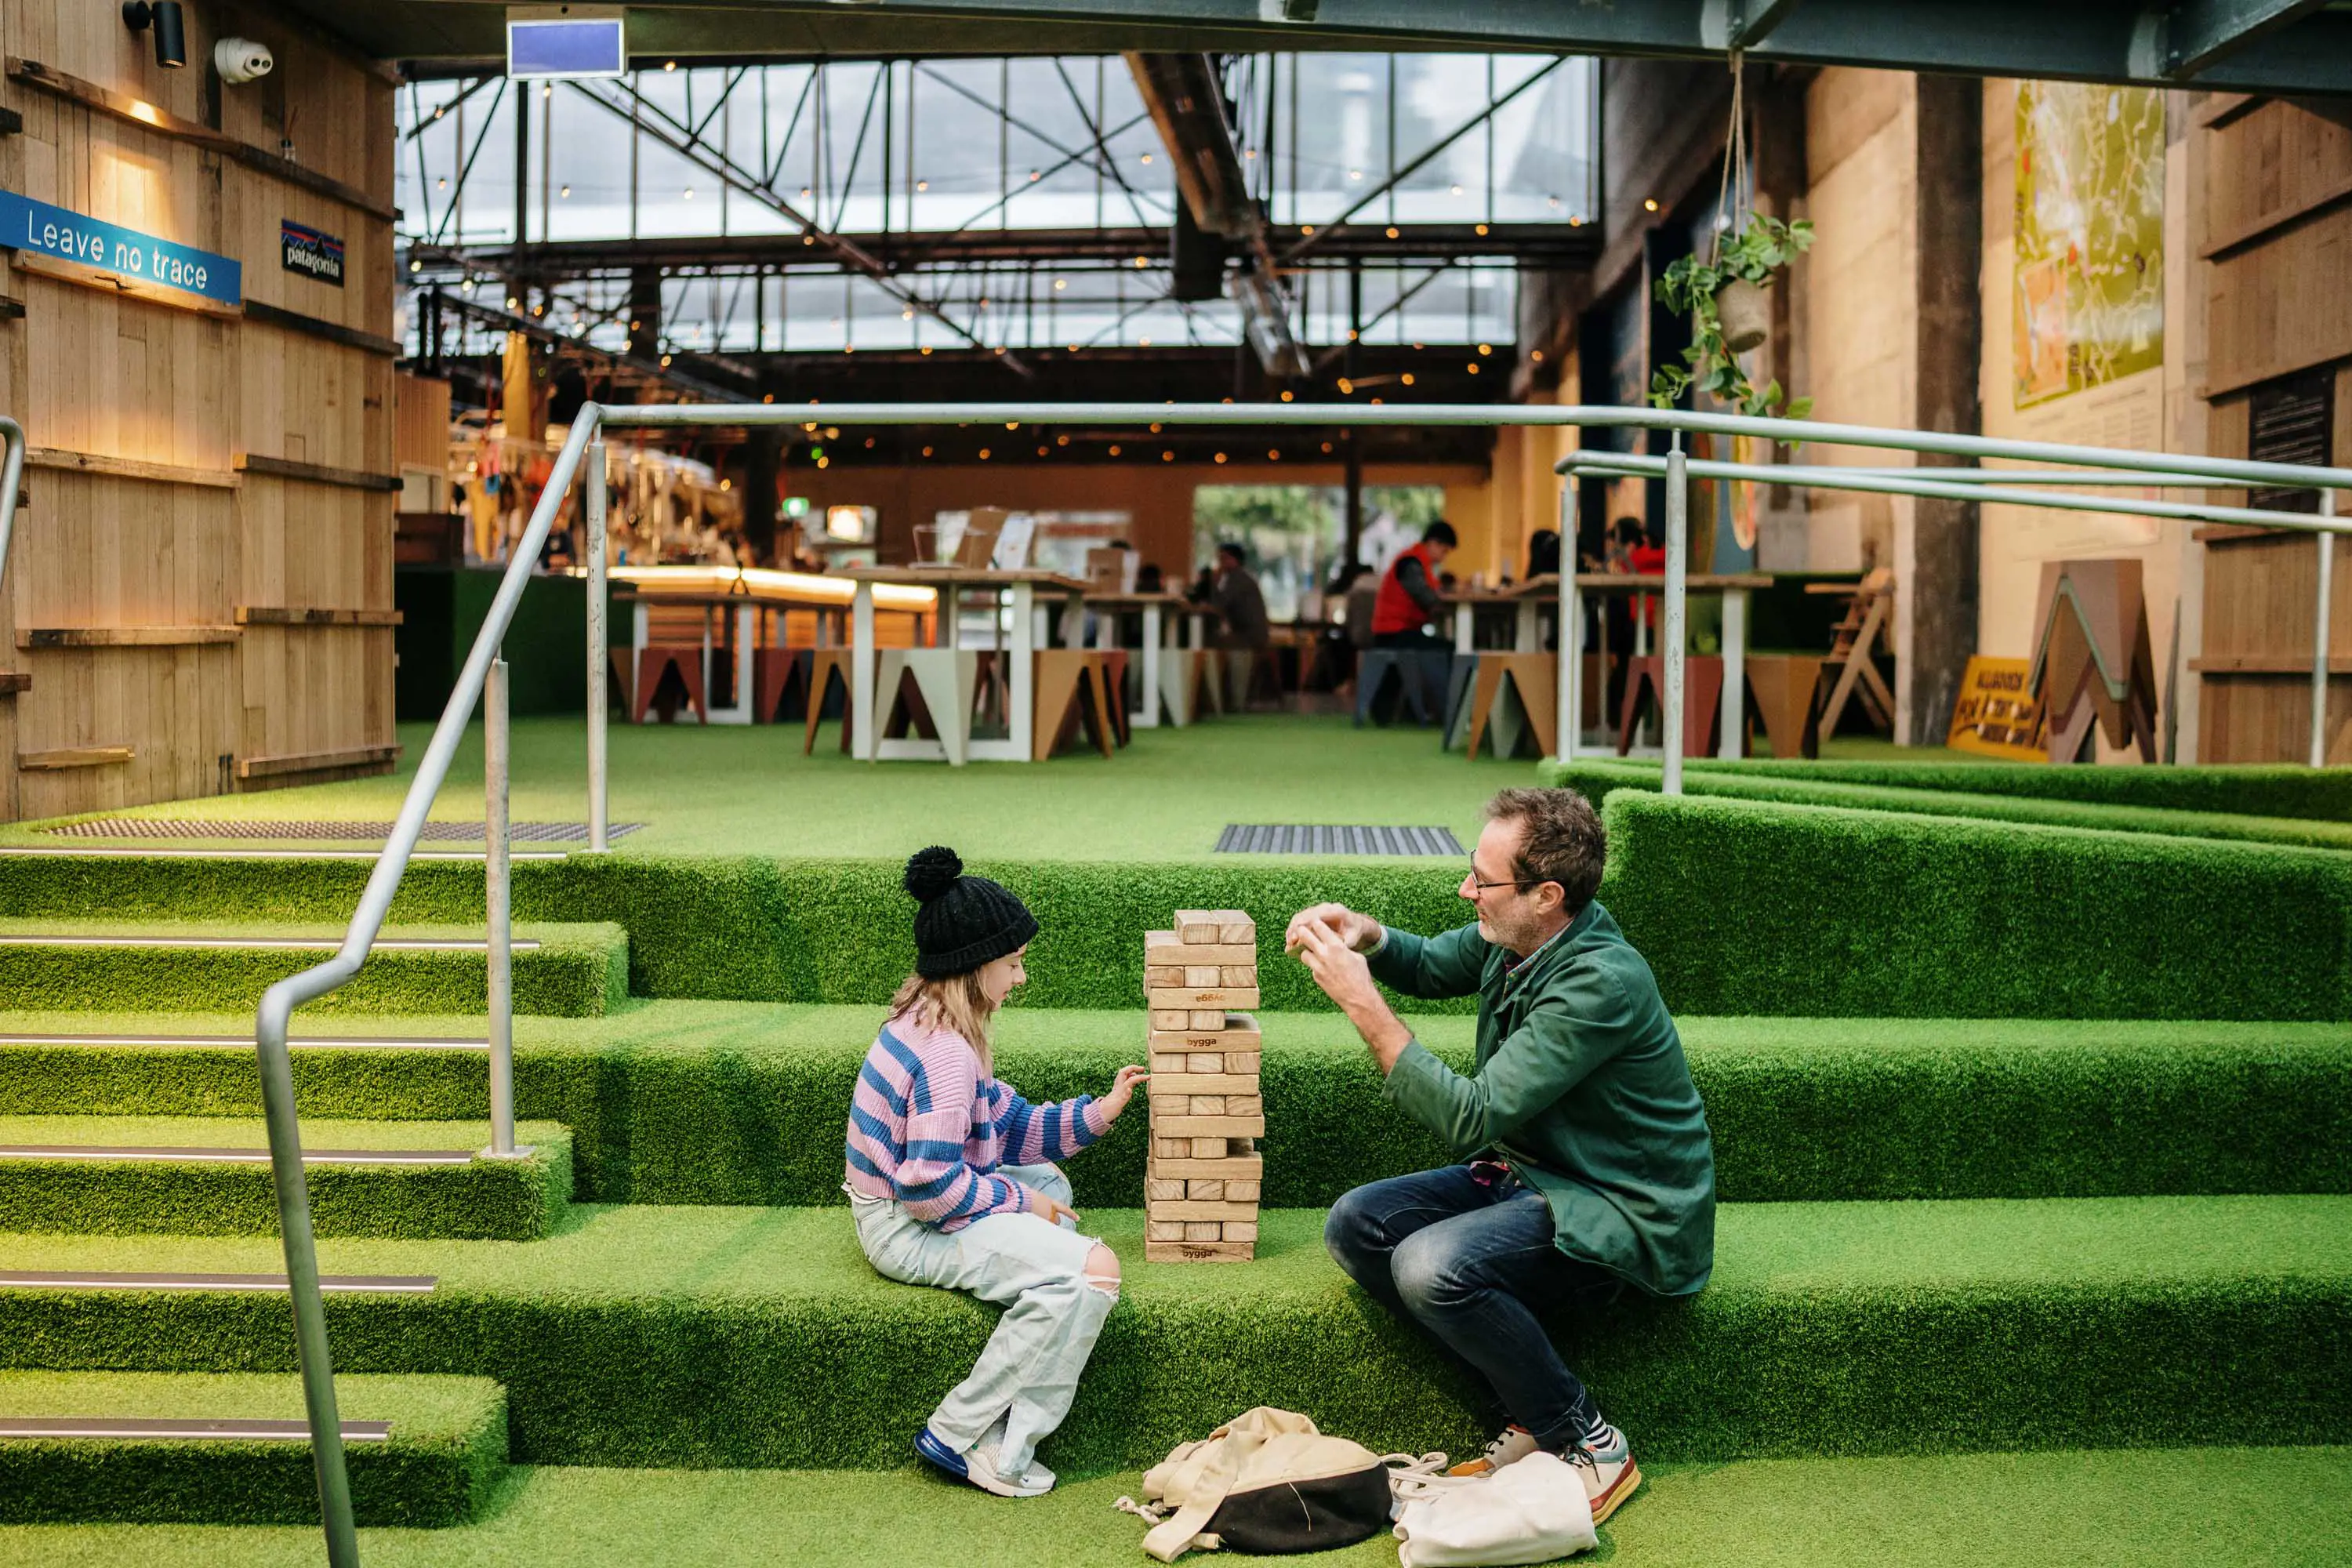 A father and daughter sit on steps inside a large. converted warehouse brewery and play a game.